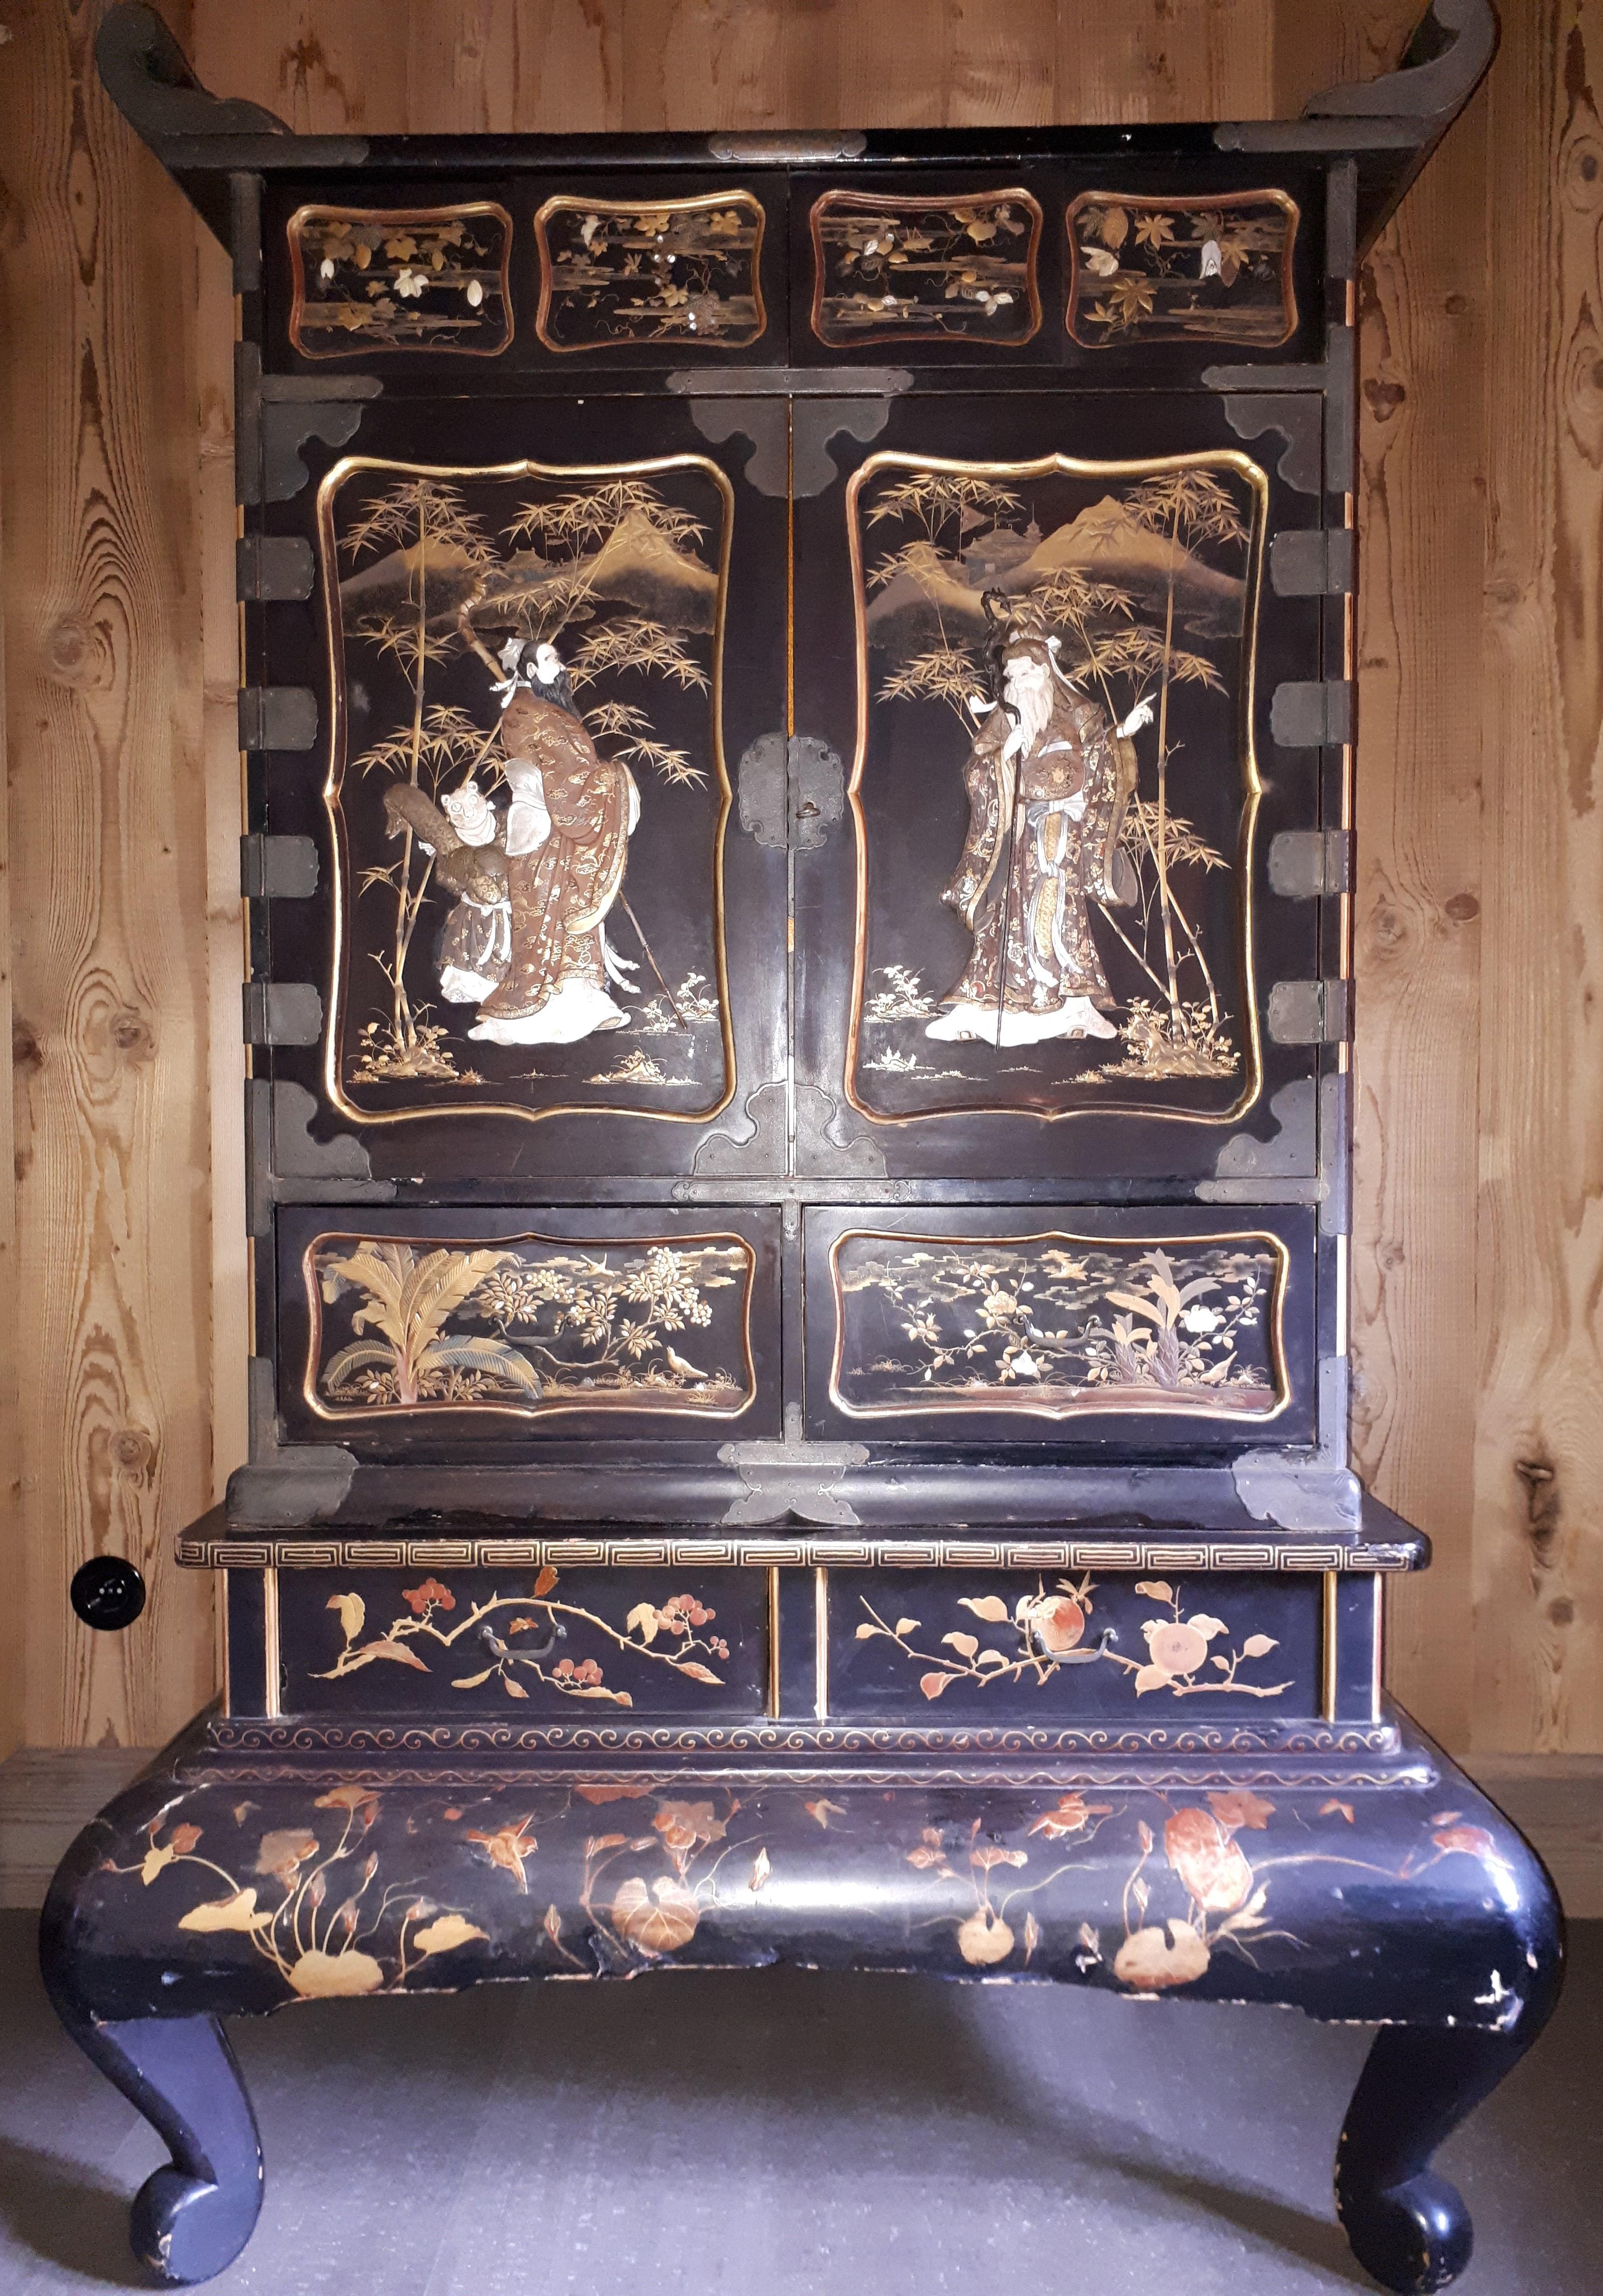 Rare Japanese Shibayama cabinet with multiple drawers and sliding panels. The two central leaves reveal a precious compartment with multiple drawers, entirely covered in nashiji lacquer, which is incredibly fresh ! Superb quality of lacquer and